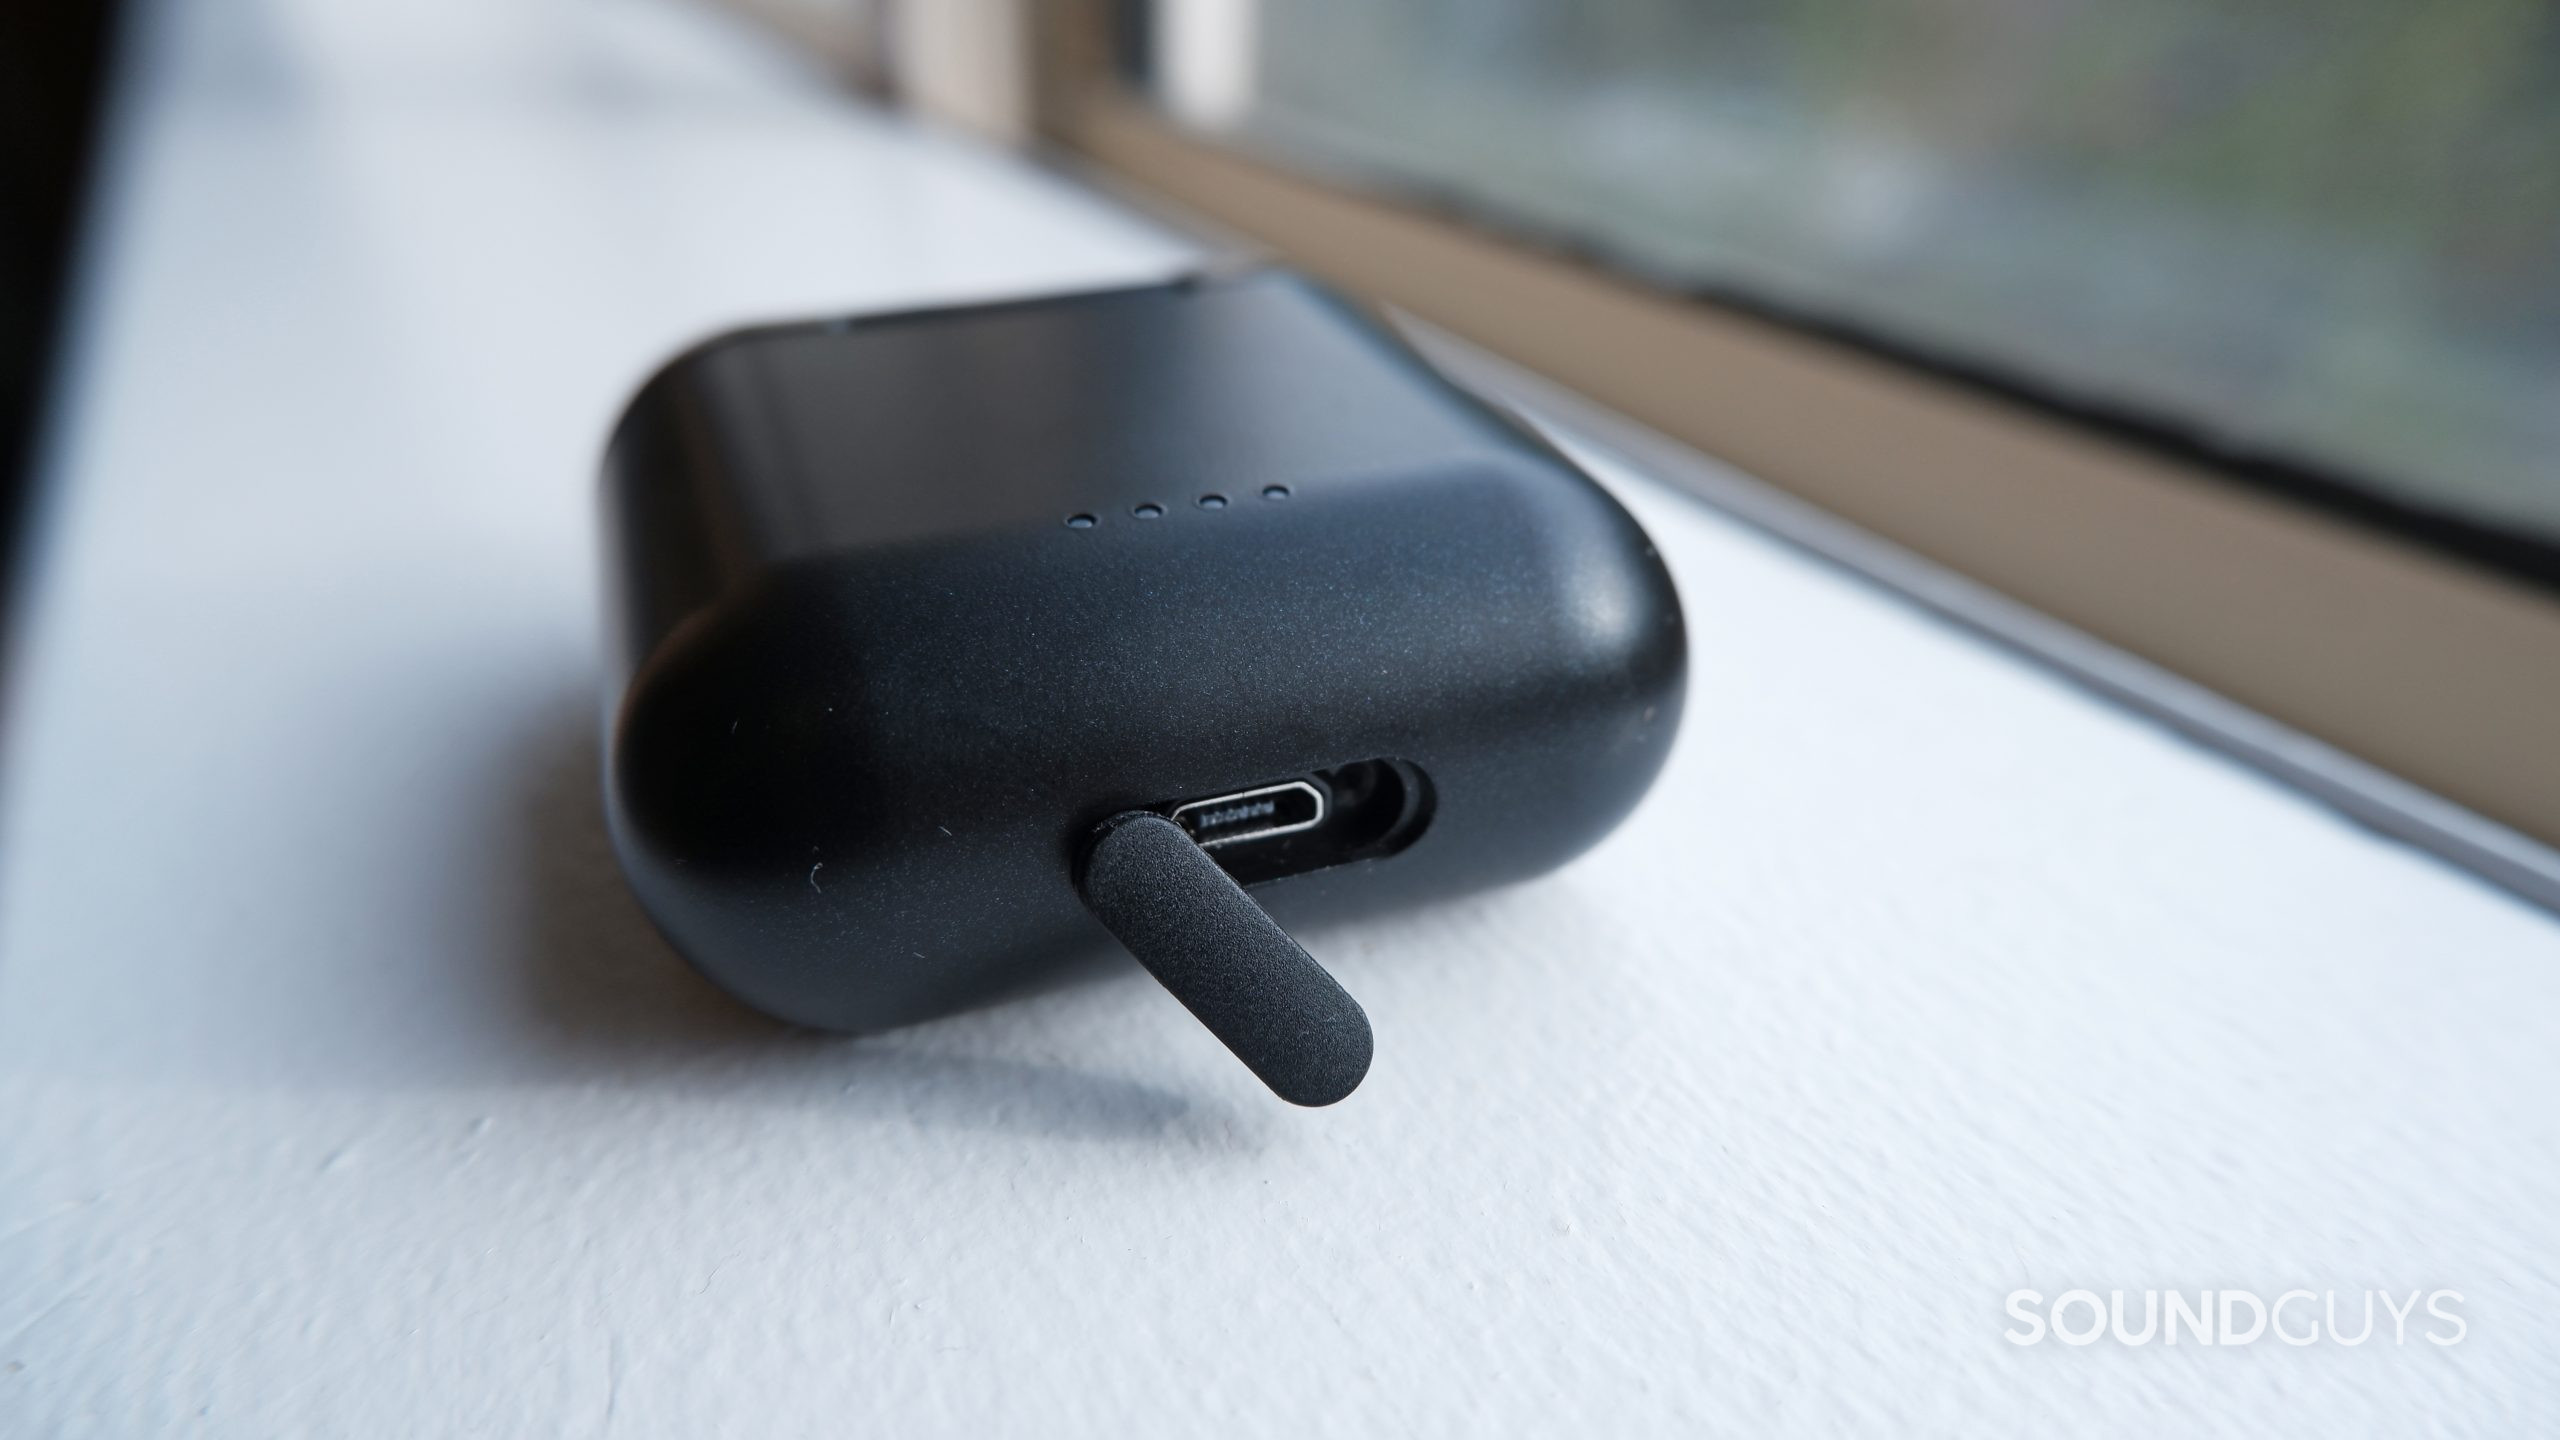 The TOZO T6 case sits on a window sill showing the USB-C port cover open.